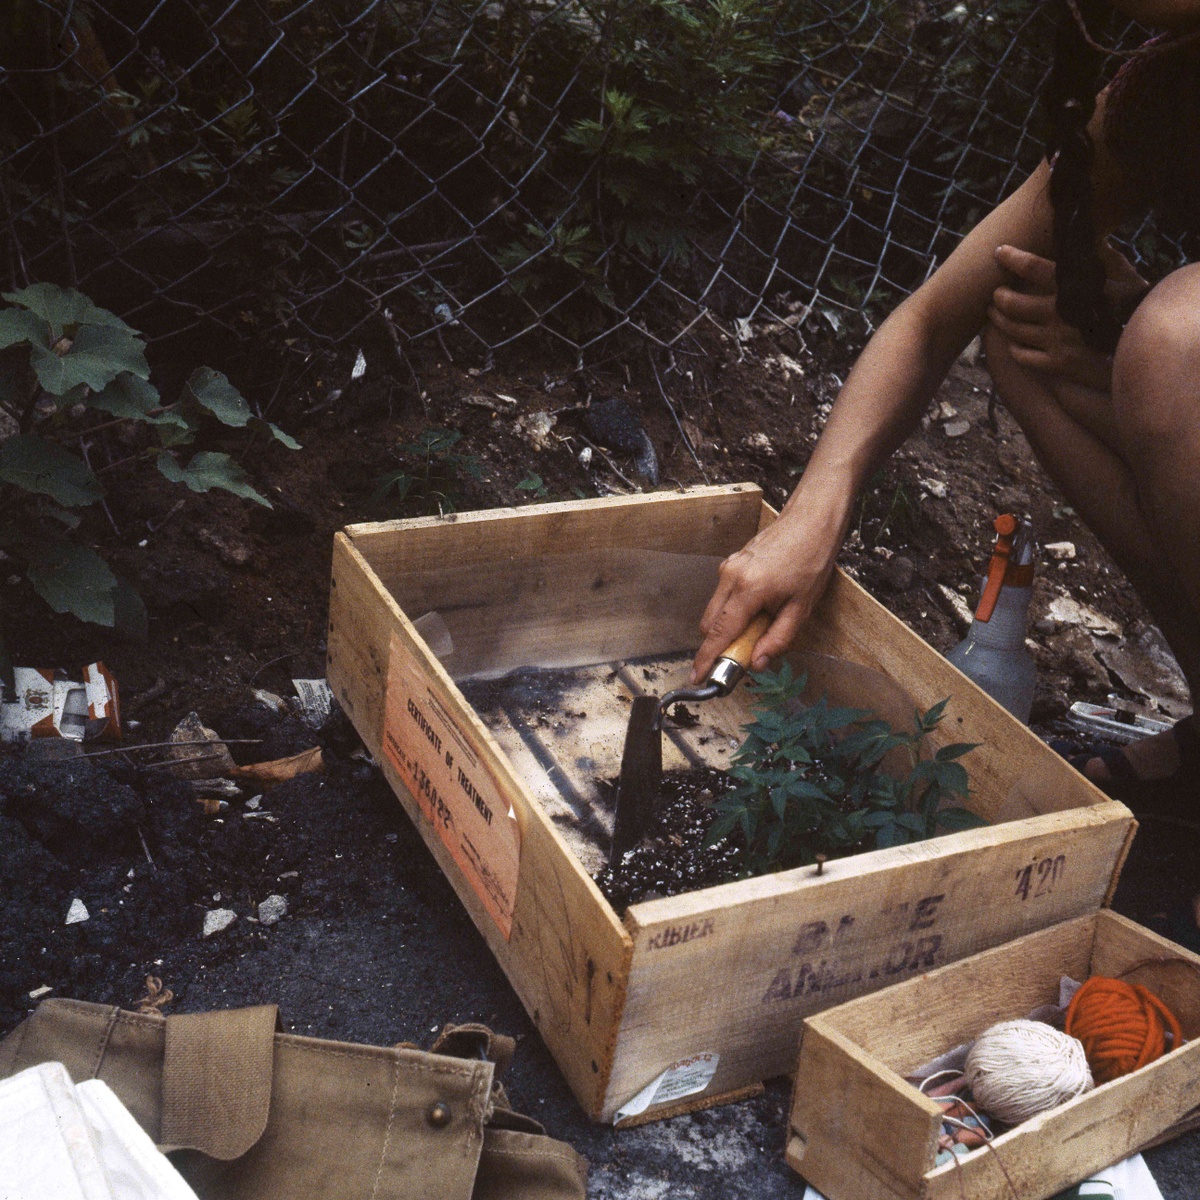 A hand holding a gardening shovel reaches into a wooden box of fresh dirt and plants. The box sits on asphalt, colliding with a patch of unkempt land.